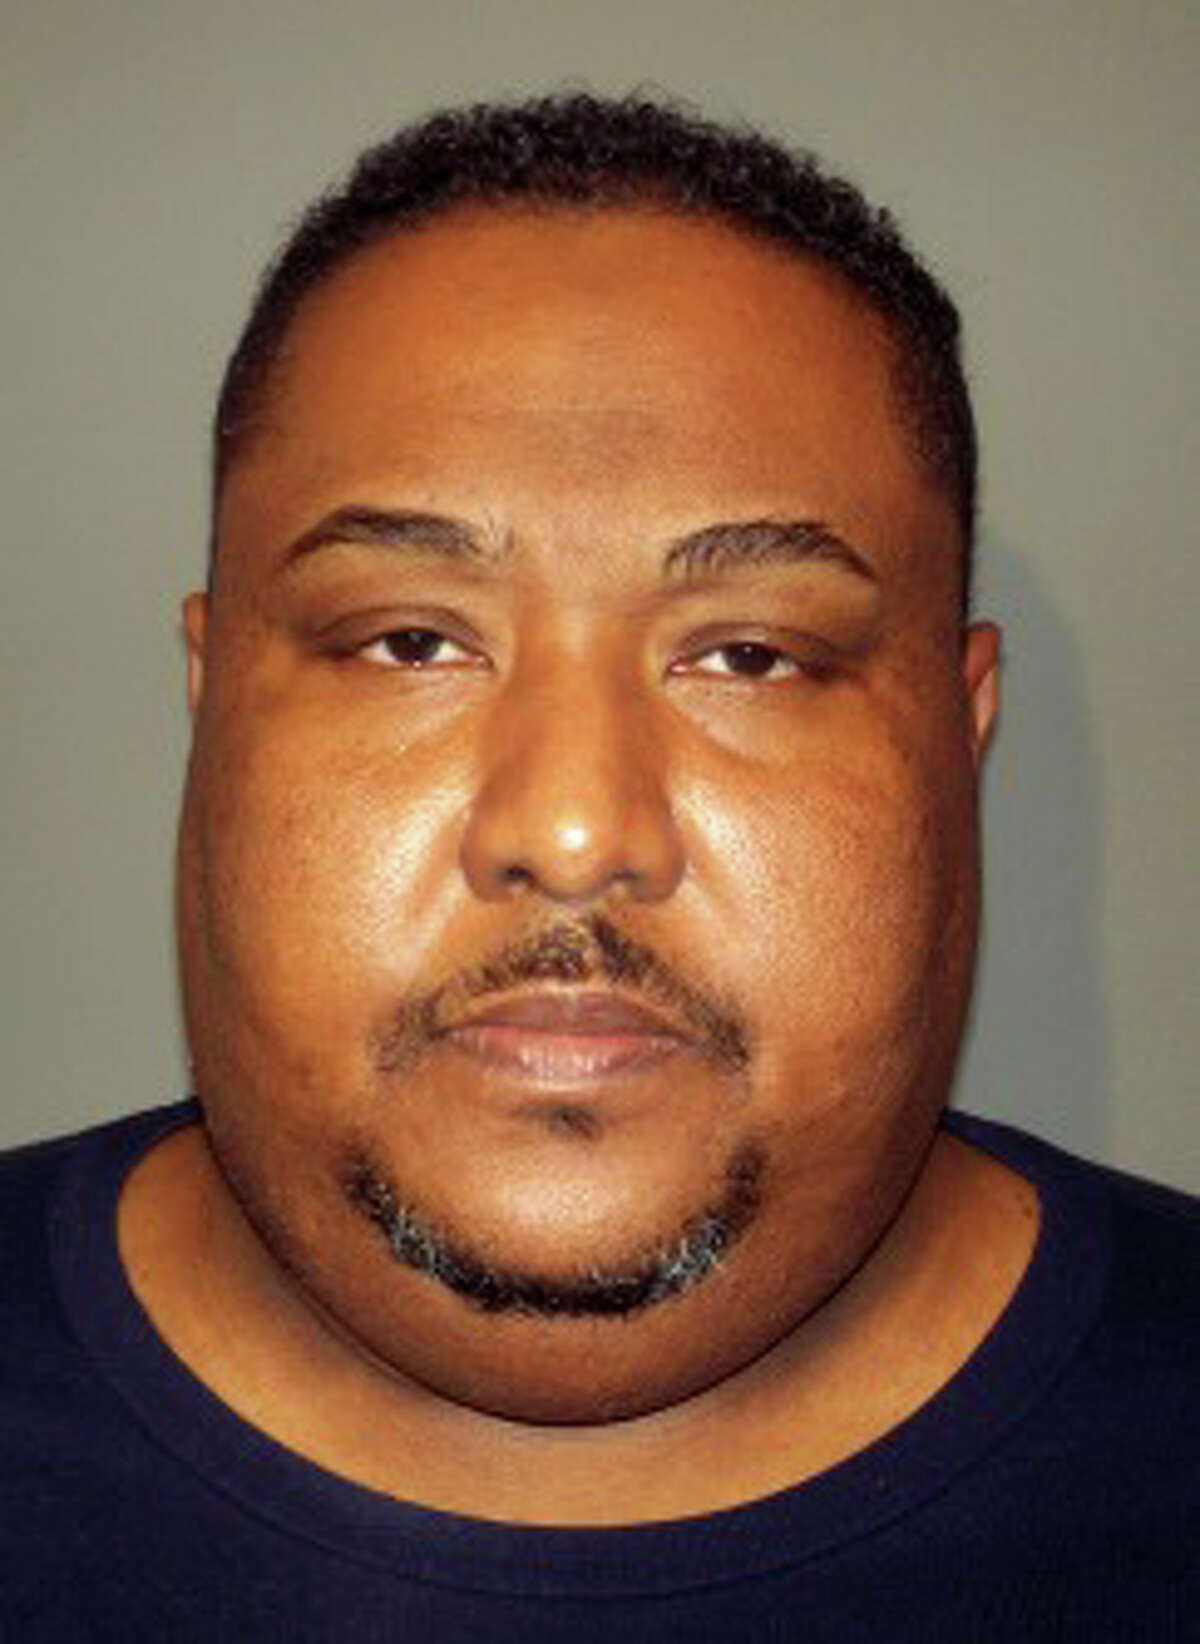 Jesus Rivera, 42, of Bronx, N.Y., faces charges in connection with fraudulent cell phone insurance claims, according to New Canaan police.